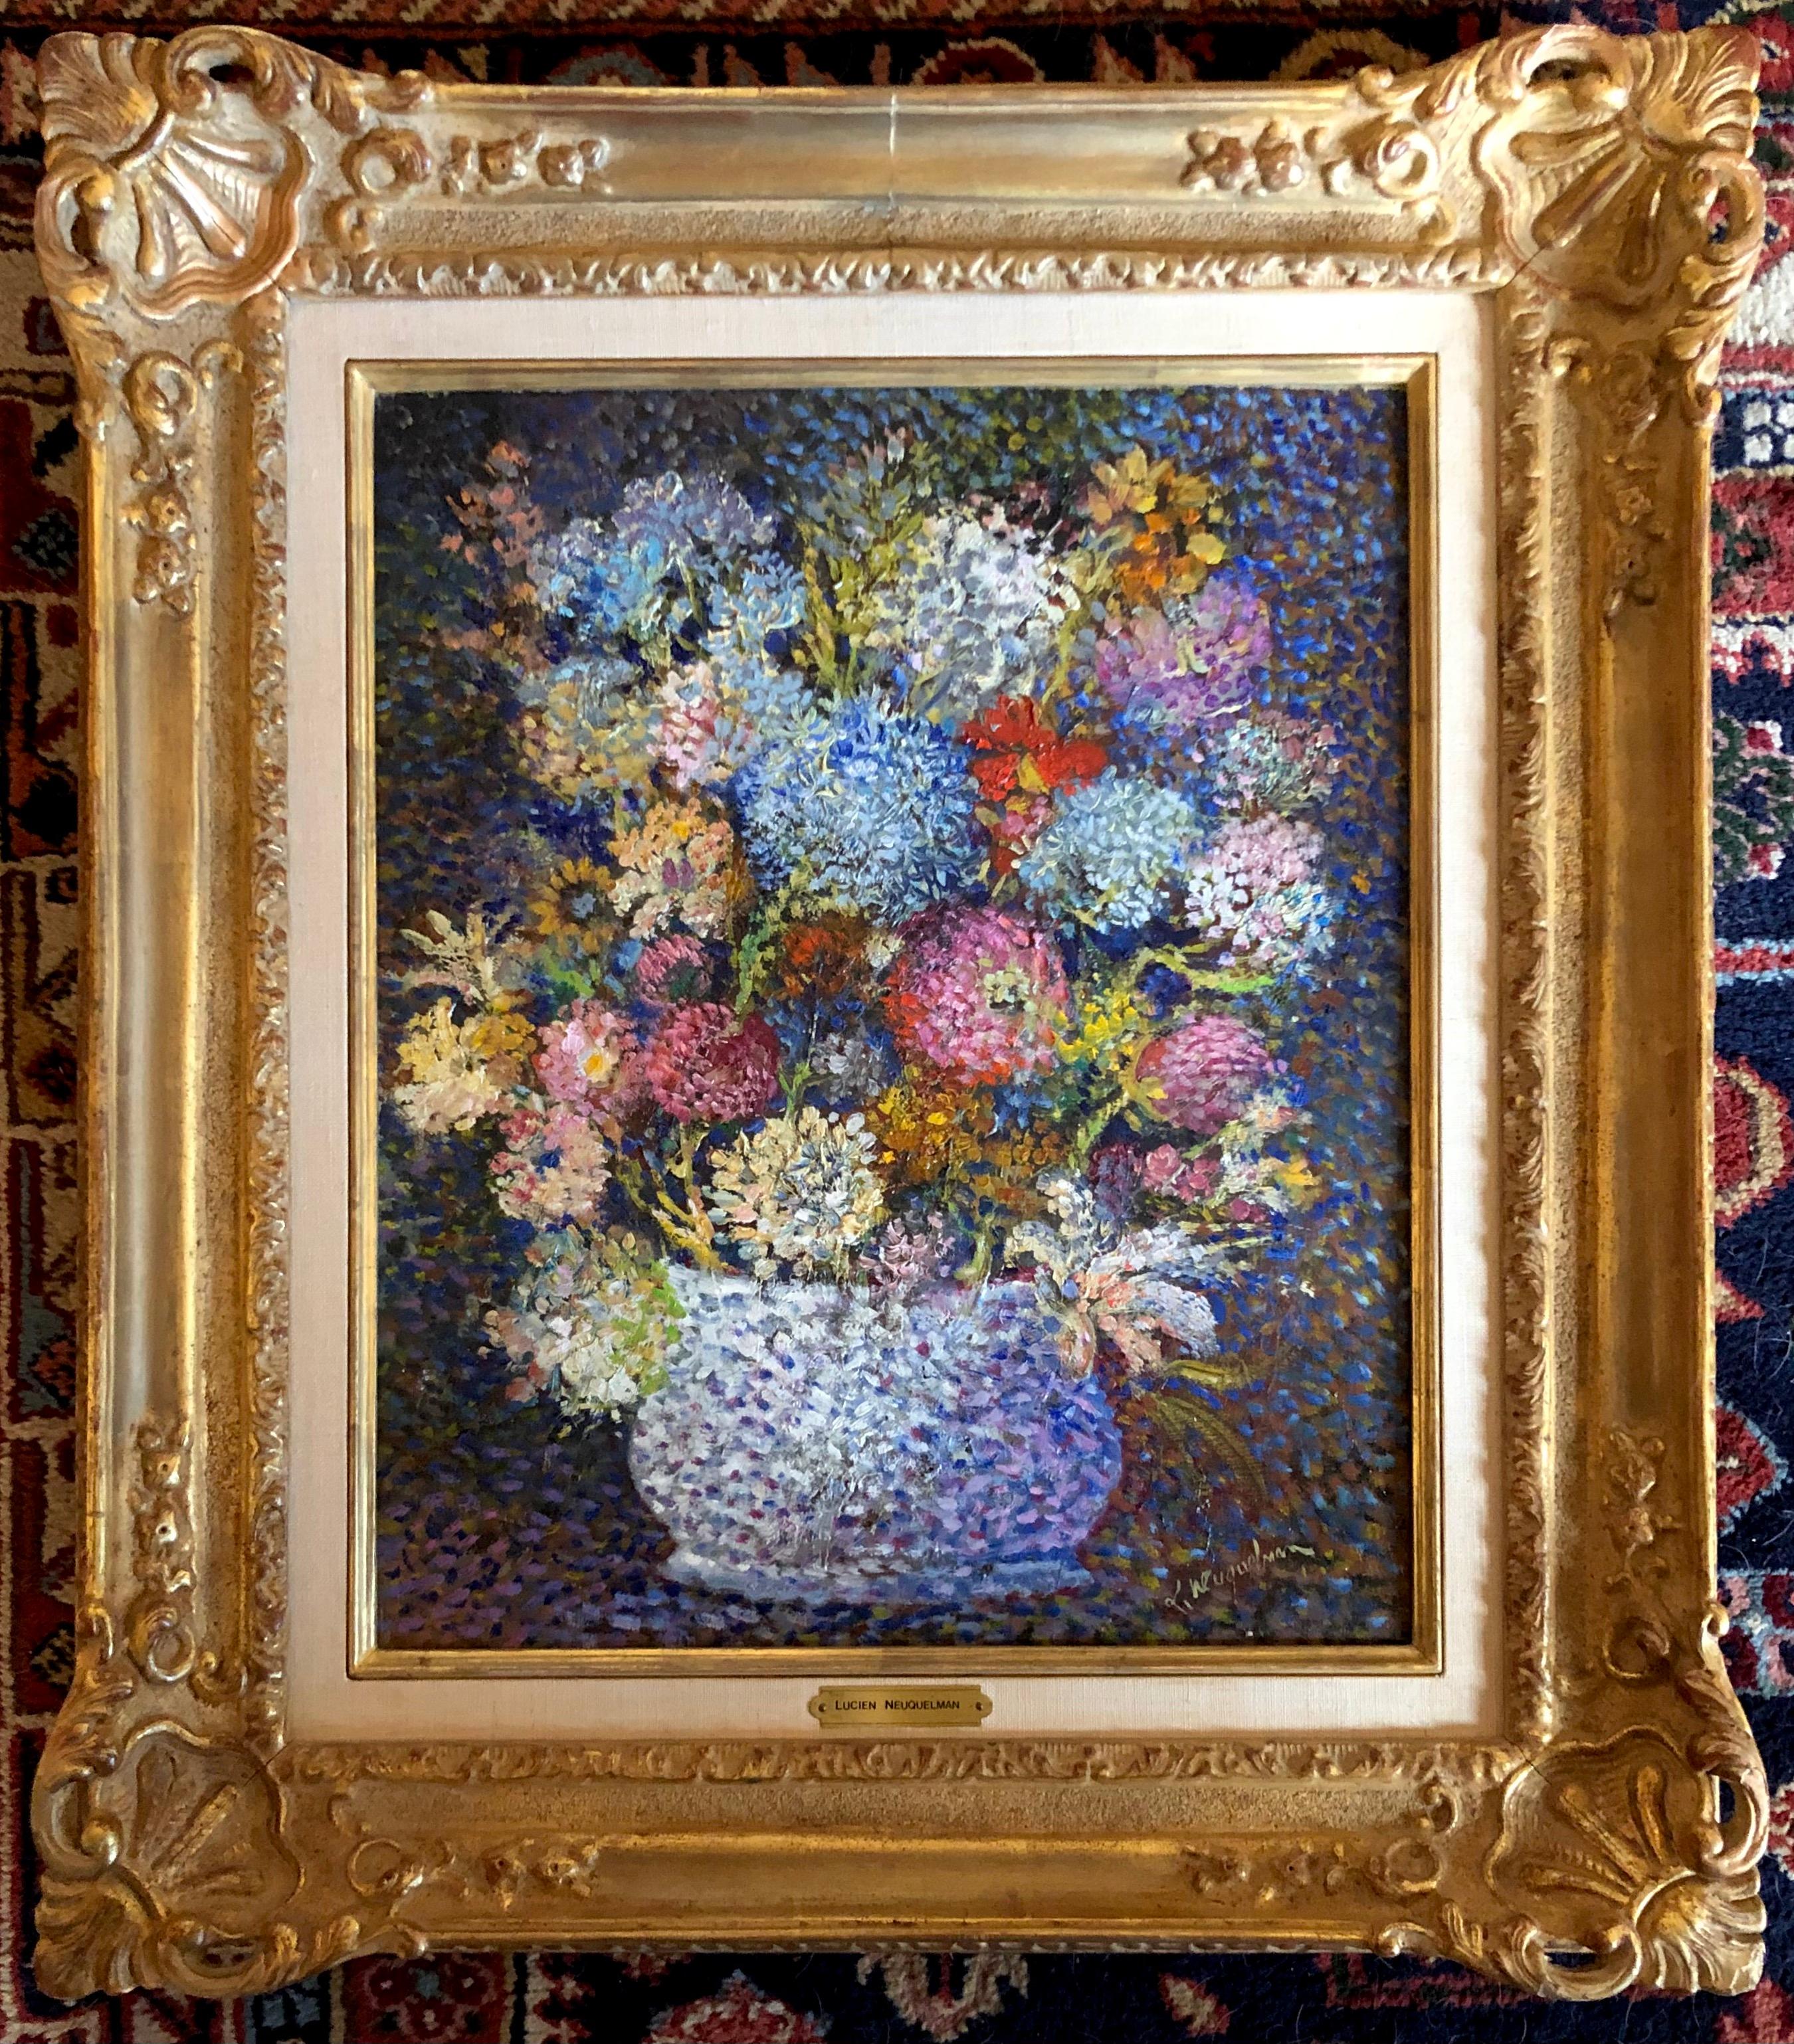 Vase of Flowers - Painting by Lucien Neuquelman